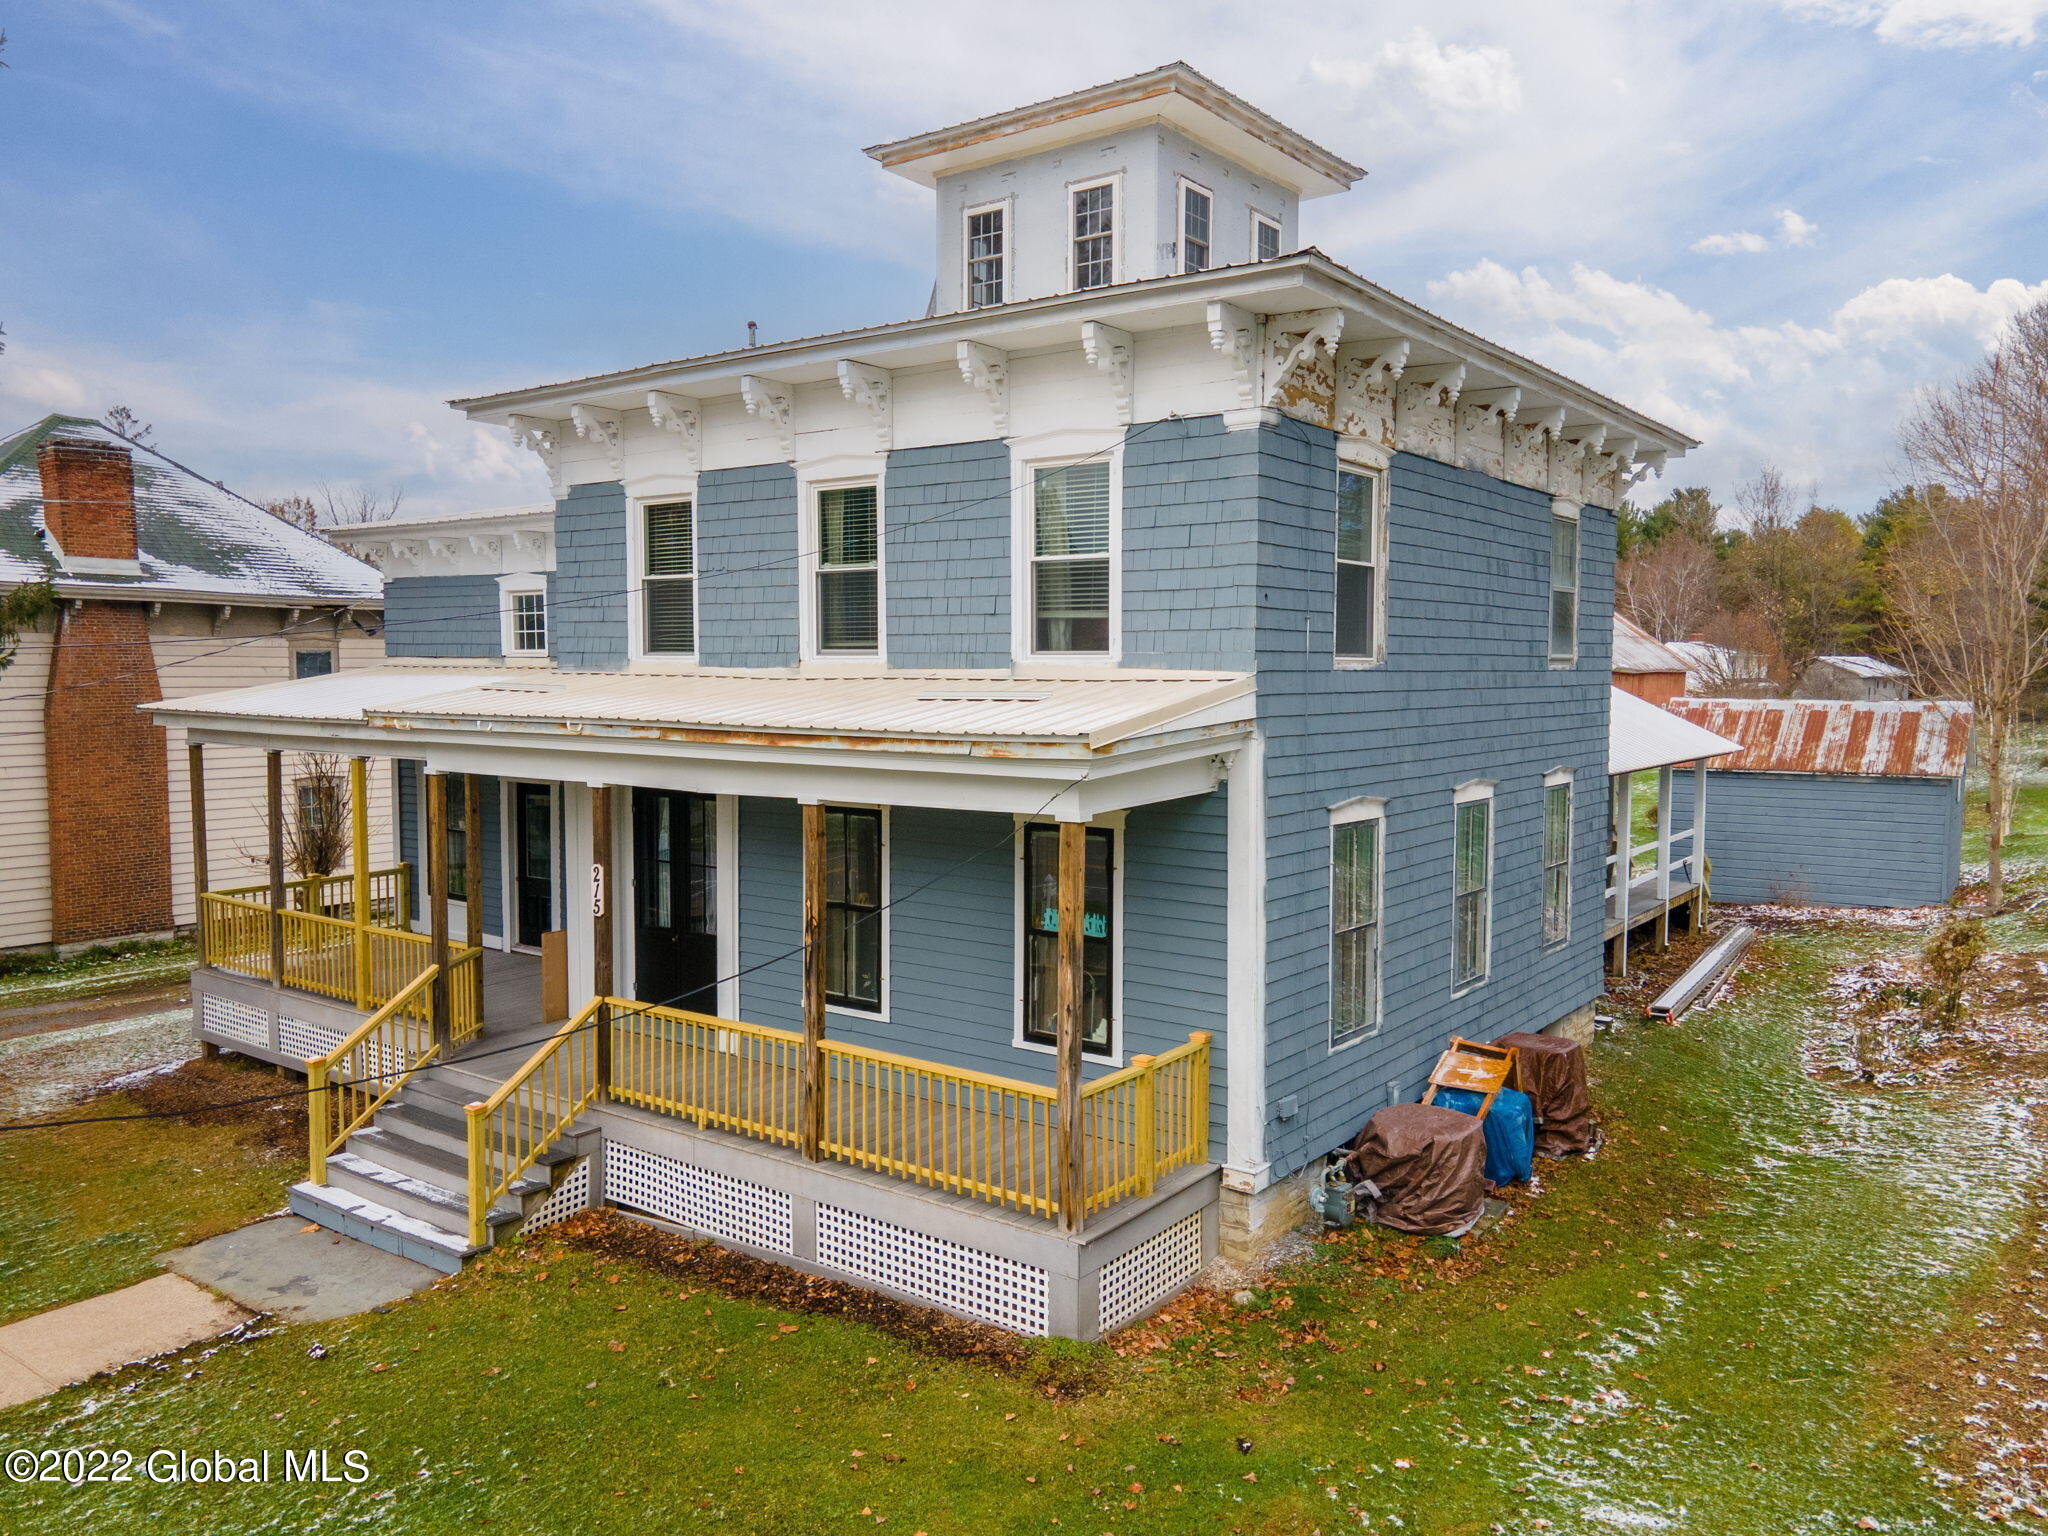 Realtyna, 215 E Main Street, Richfield Springs, 36077, New York 13439, 5 Bedrooms Bedrooms, 10 Rooms Rooms,3 BathroomsBathrooms,Residential Income,For Sale,E Main Street,11122163